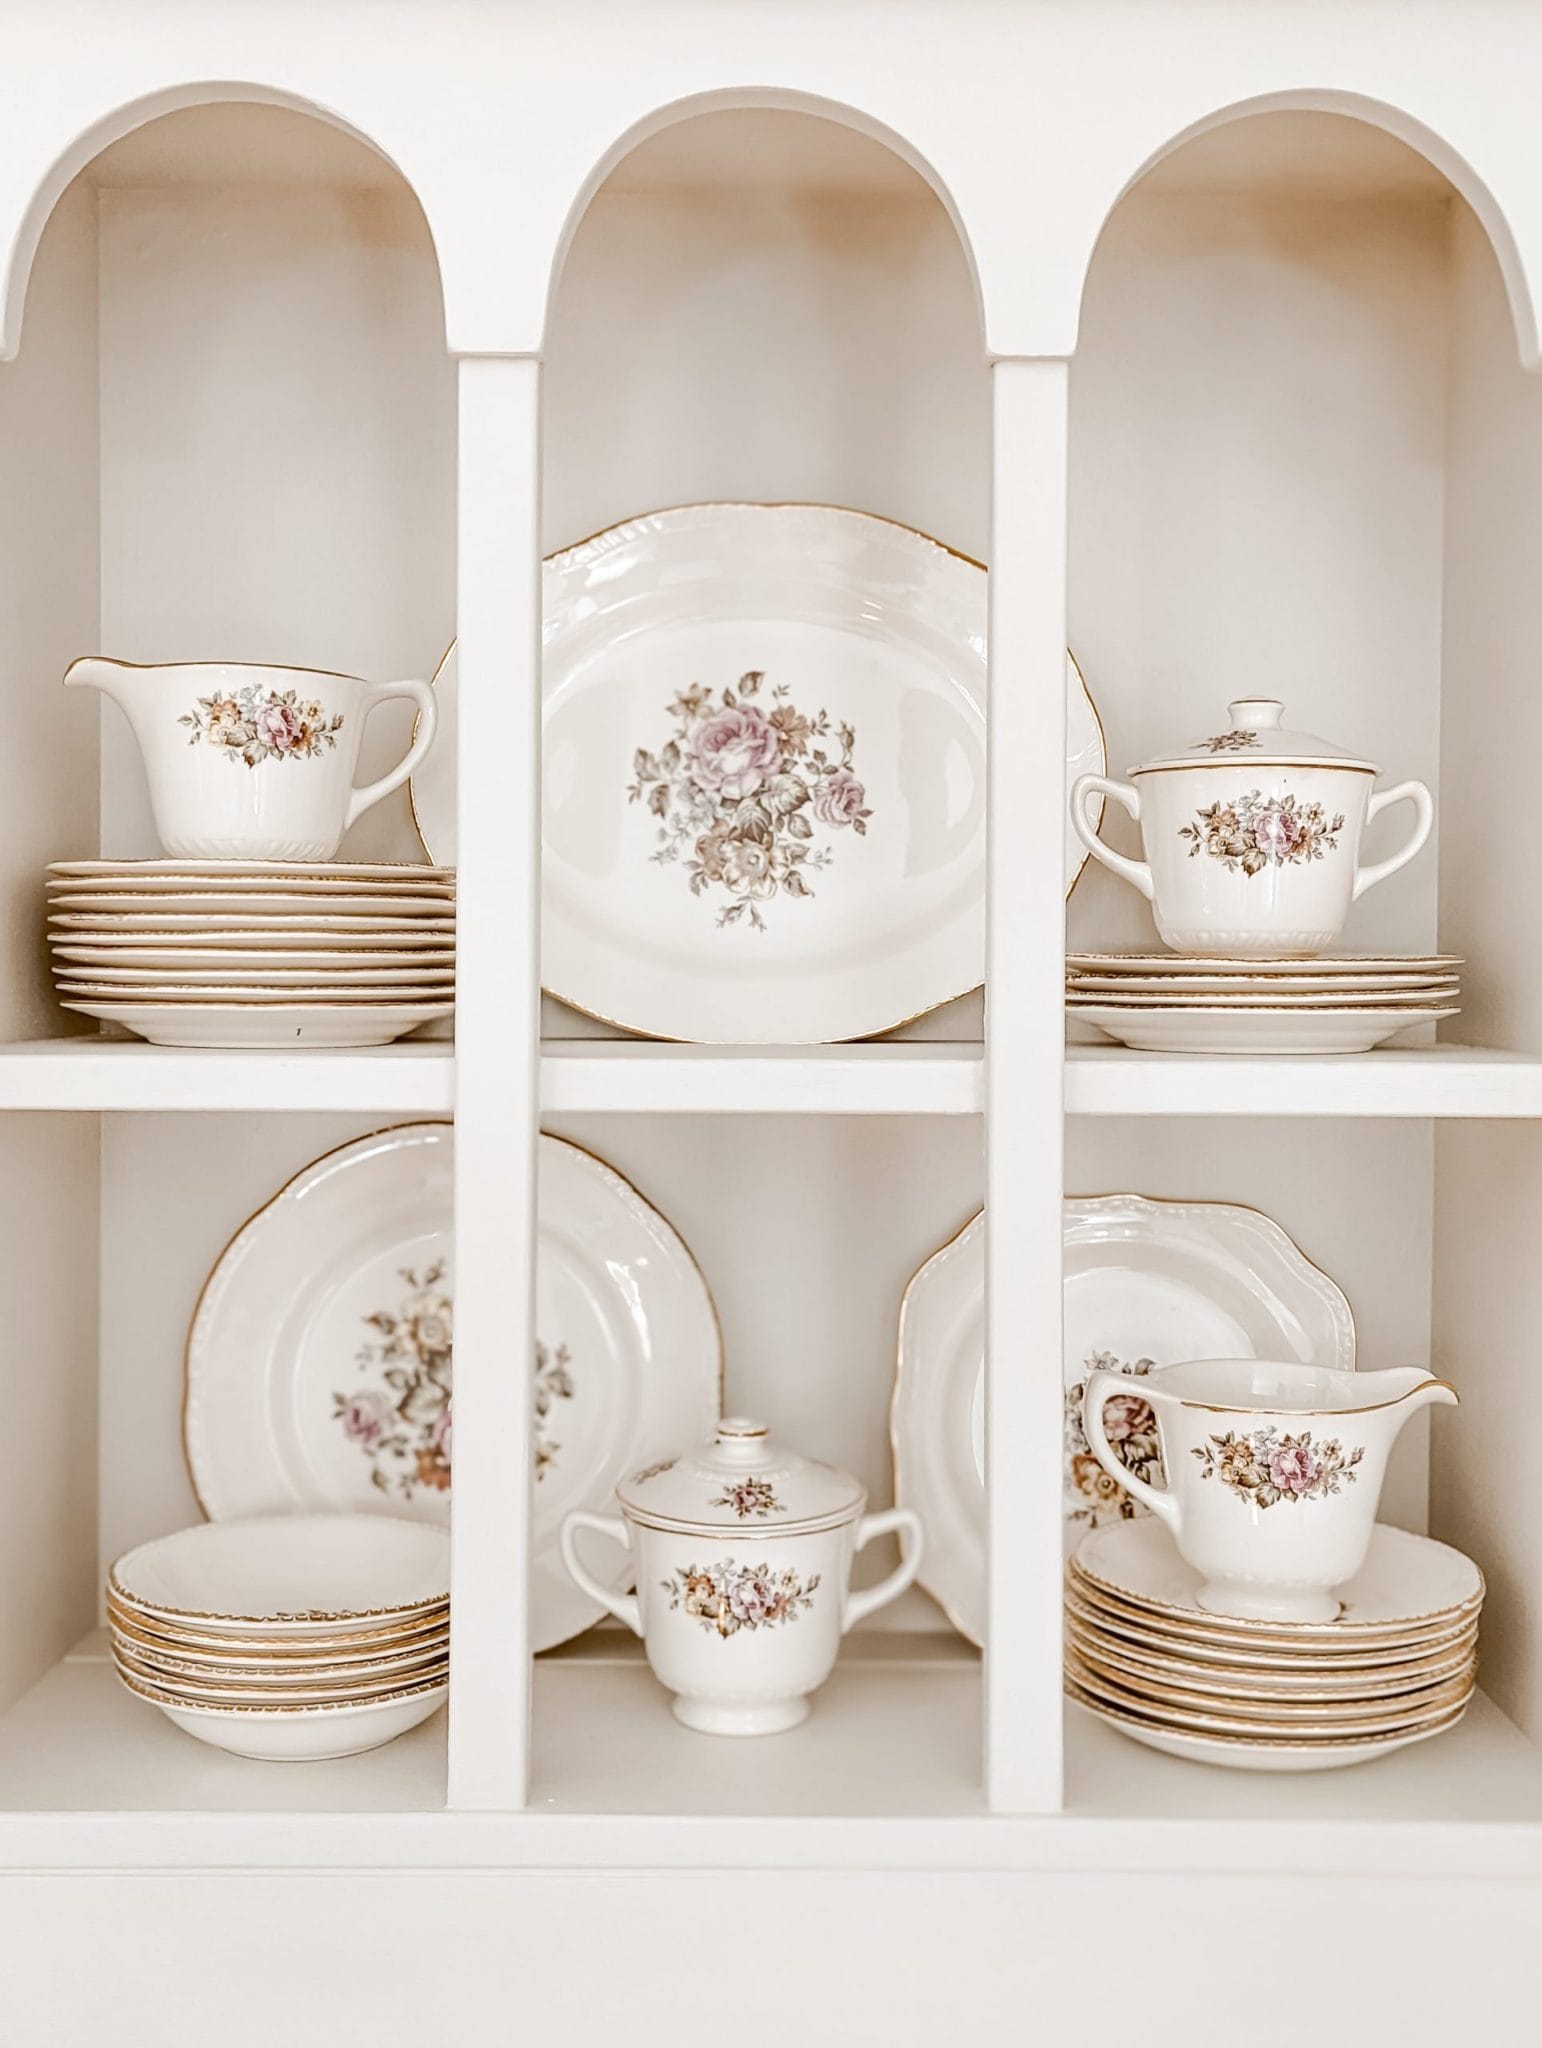 vintage china collection with roses and gold rim